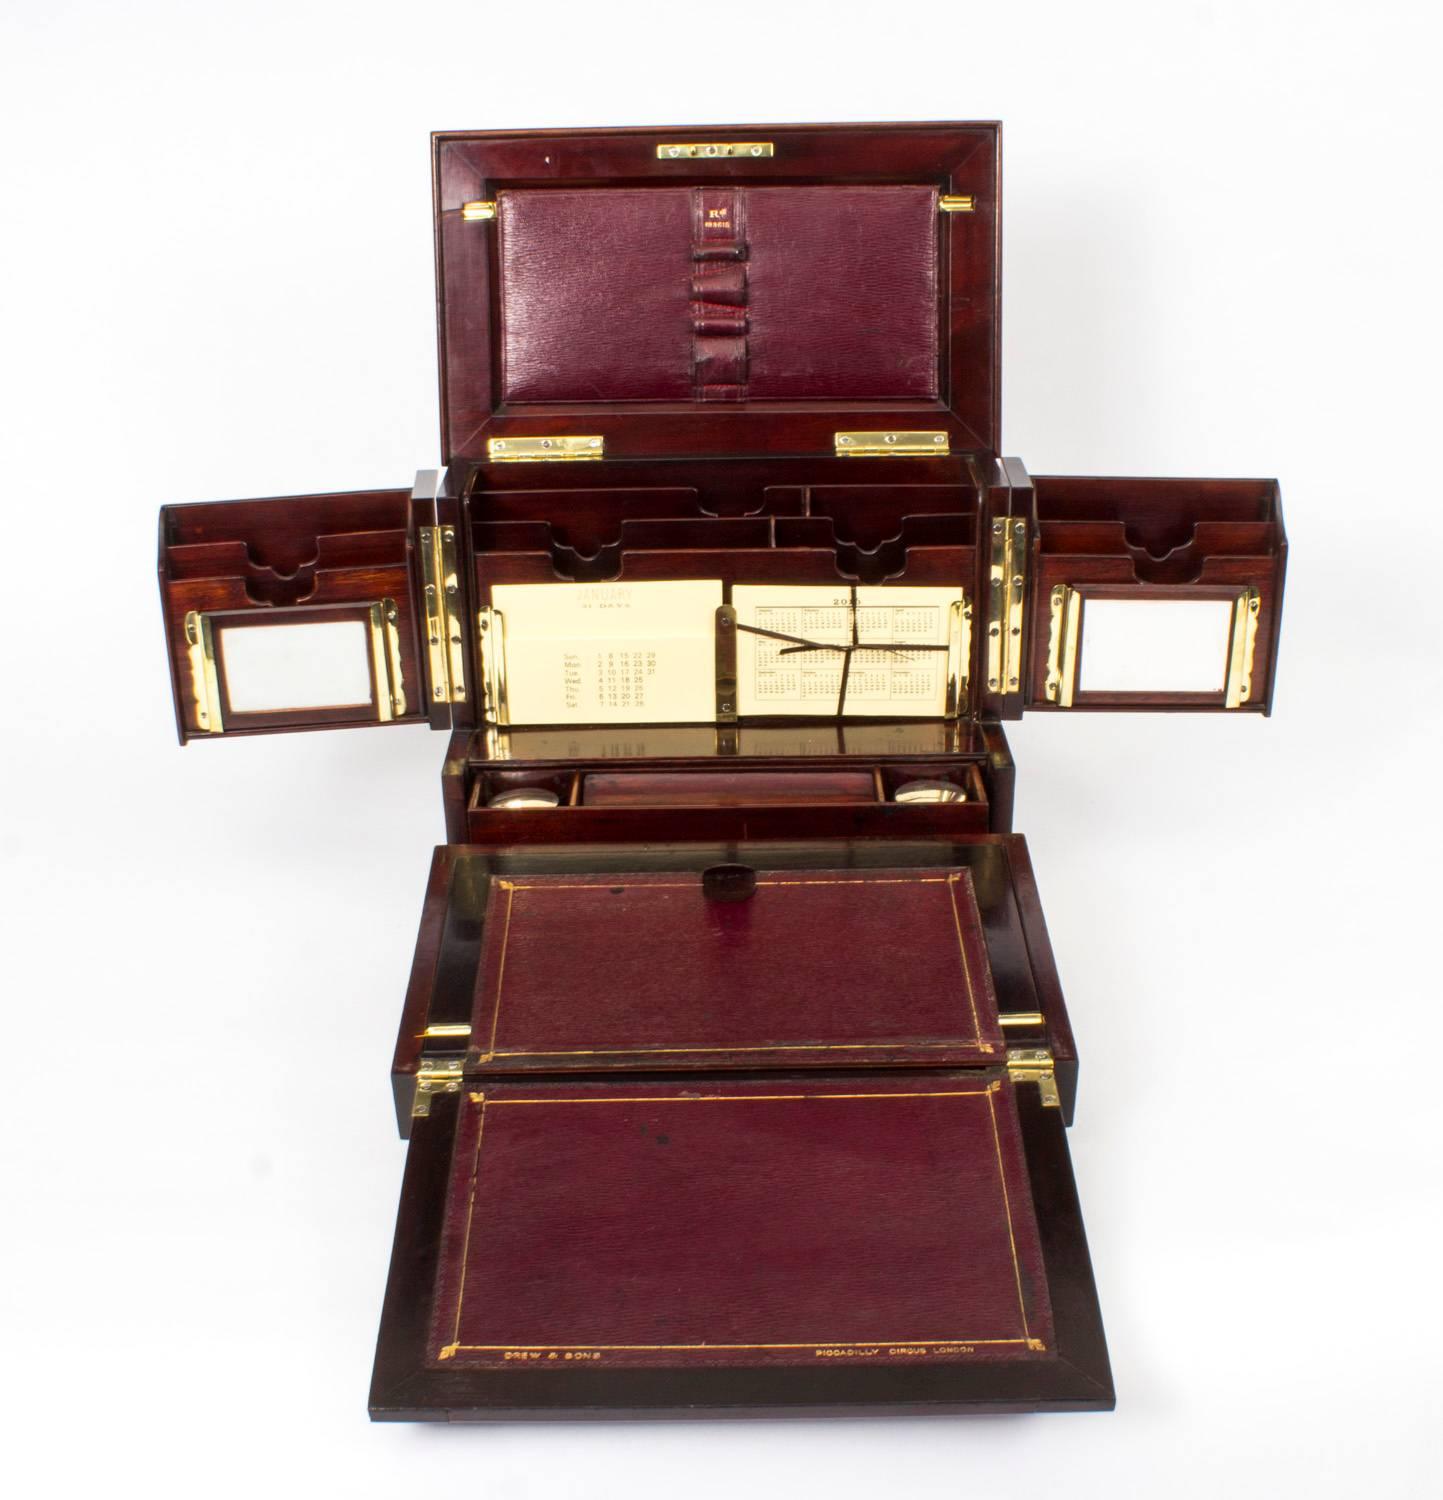 This is a magnificent antique Victorian inlaid black walnut and mahogany writing slope and stationery box compendium, circa 1860 in date, and bearing the name of the renowned box maker and retailer Drew & Sons, of Piccadilly Circus,